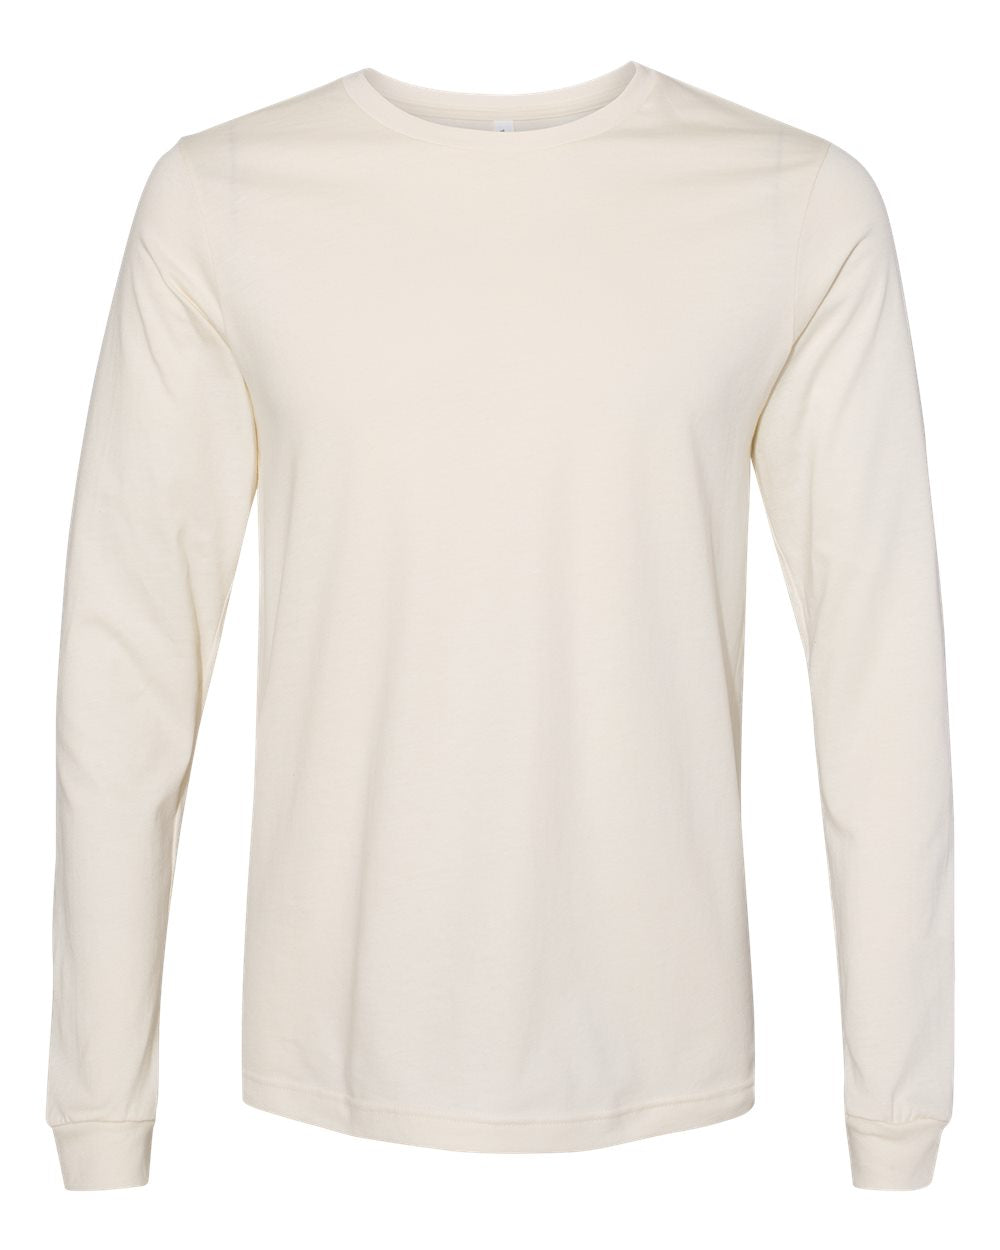 BELLA + CANVAS Unisex Jersey Long Sleeve Tee 3501 #color_Natural